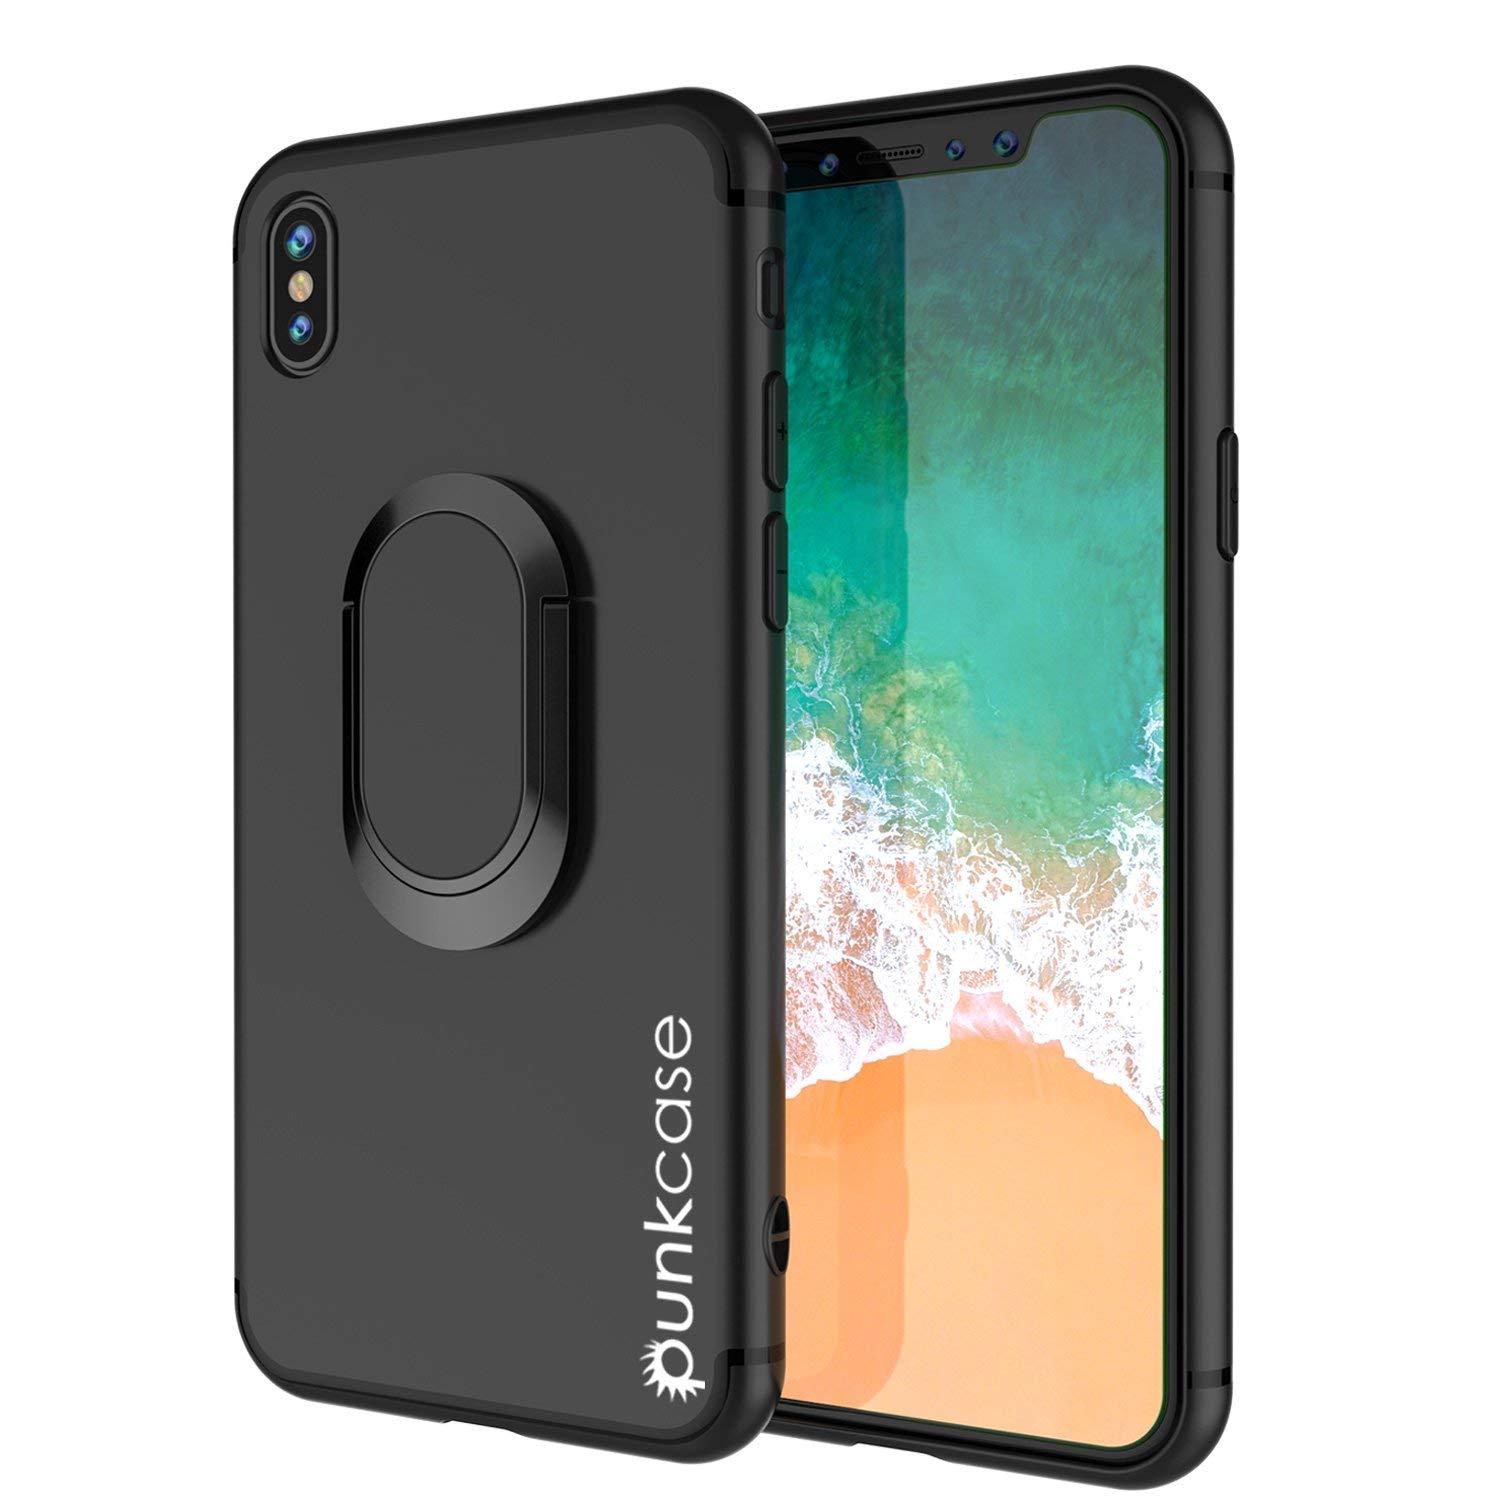 iPhone XR Case, Punkcase Magnetix Protective TPU Cover W/ Kickstand, Tempered Glass Screen Protector [Black] (Color in image: black)